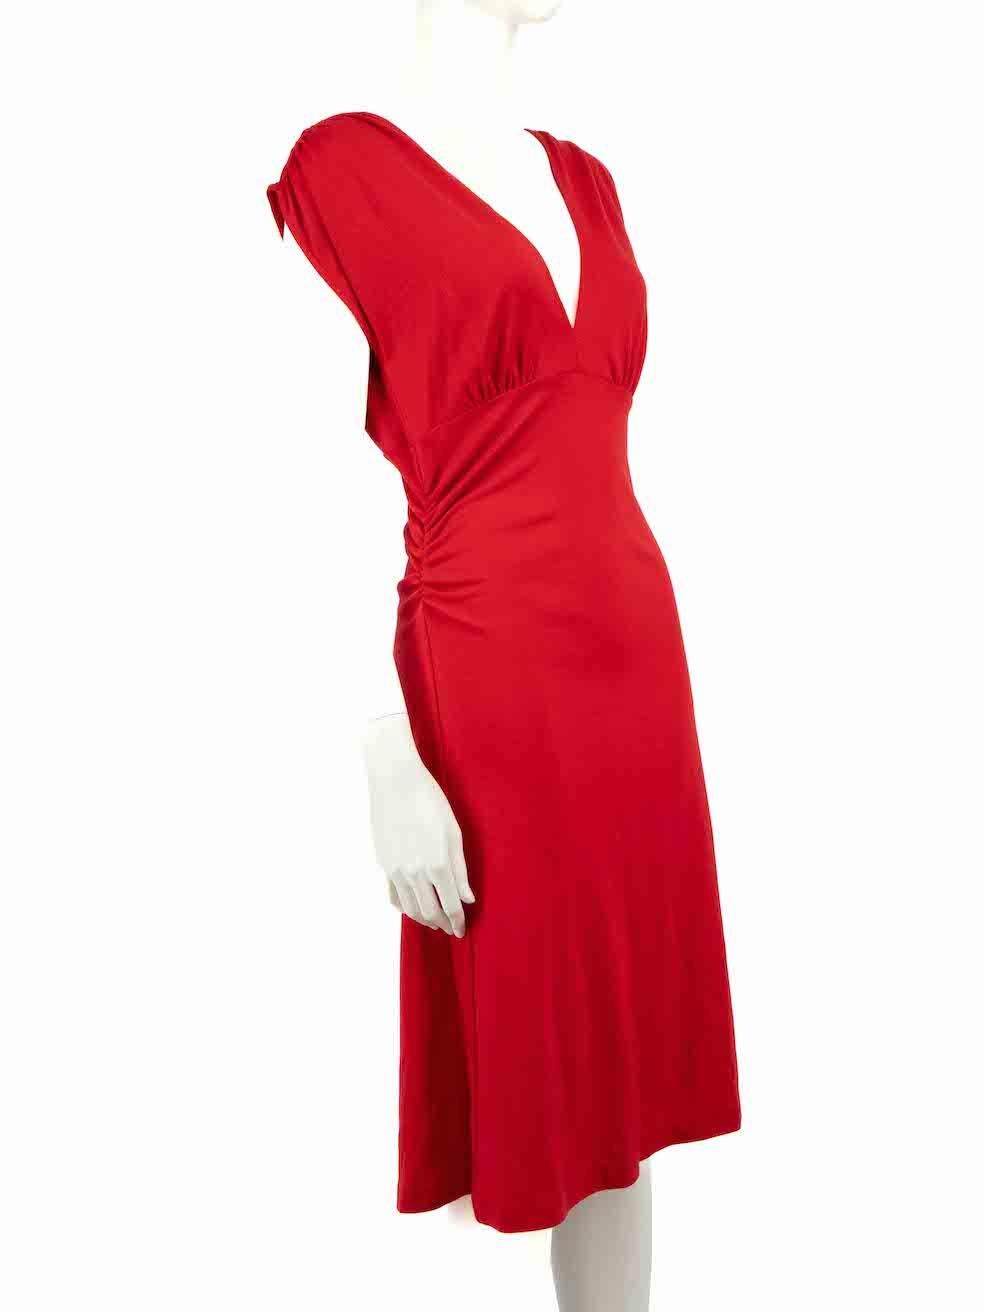 CONDITION is Very good. Hardly any visible wear to dress is evident on this used Diane Von Furstenberg designer resale item.
 
 
 
 Details
 
 
 Red
 
 Wool
 
 Knee length dress
 
 Sleeveless
 
 V neckline
 
 Stretchy
 
 Ruched on right side
 
 
 
